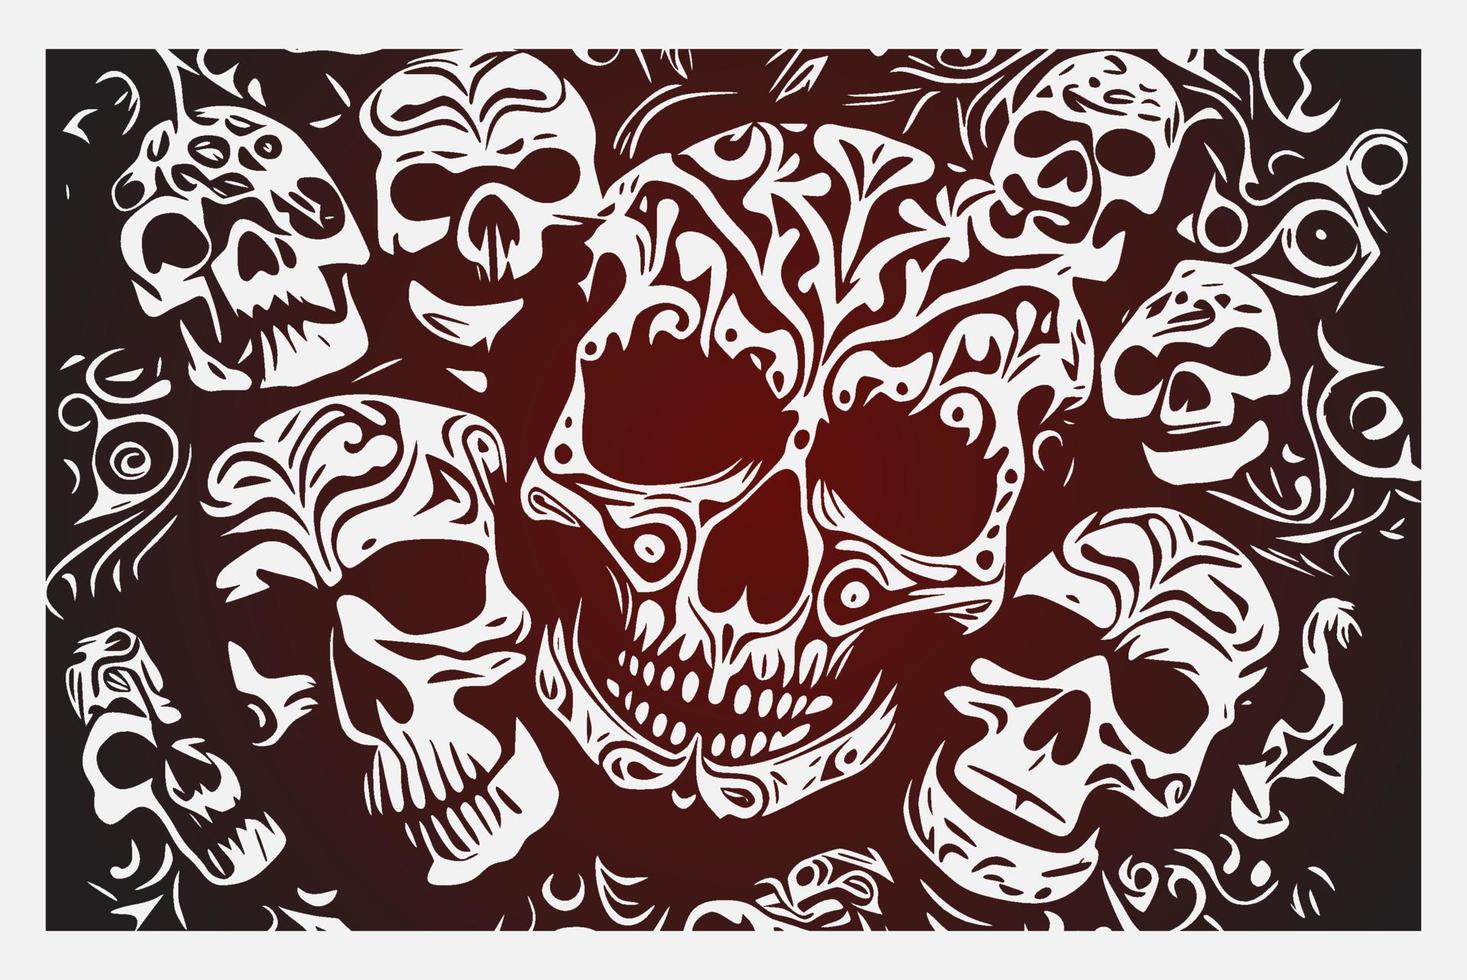 Vector Skulls Background. Vector illustration with several skulls at different angles swimming in a sea of tattoo style roses. Great collection of individually grouped elements.